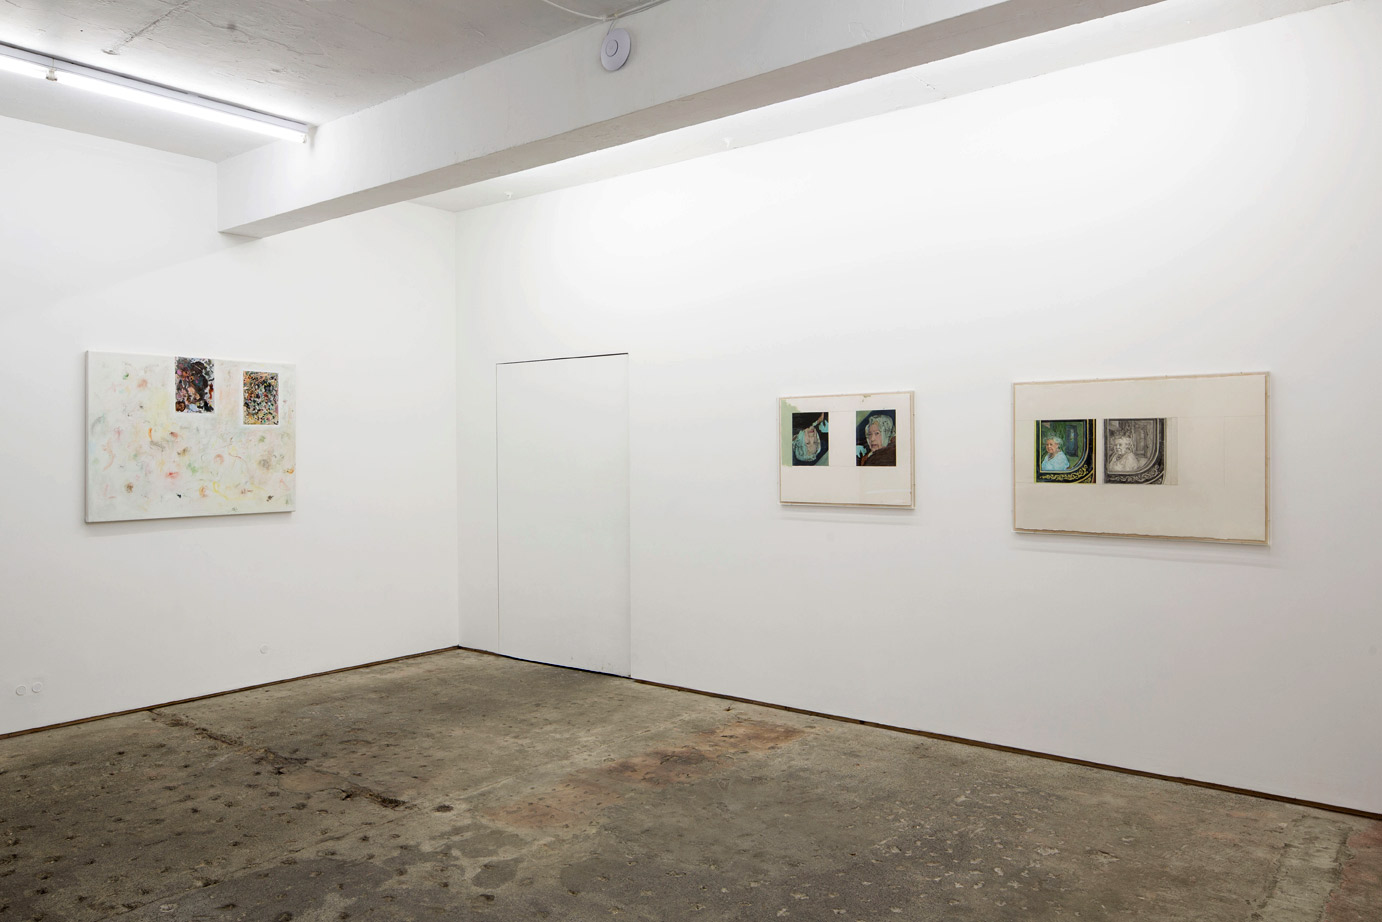 Stuart Brisley: Recent Paintings from the Museum of Ordure at Lungley gallery, London. Install